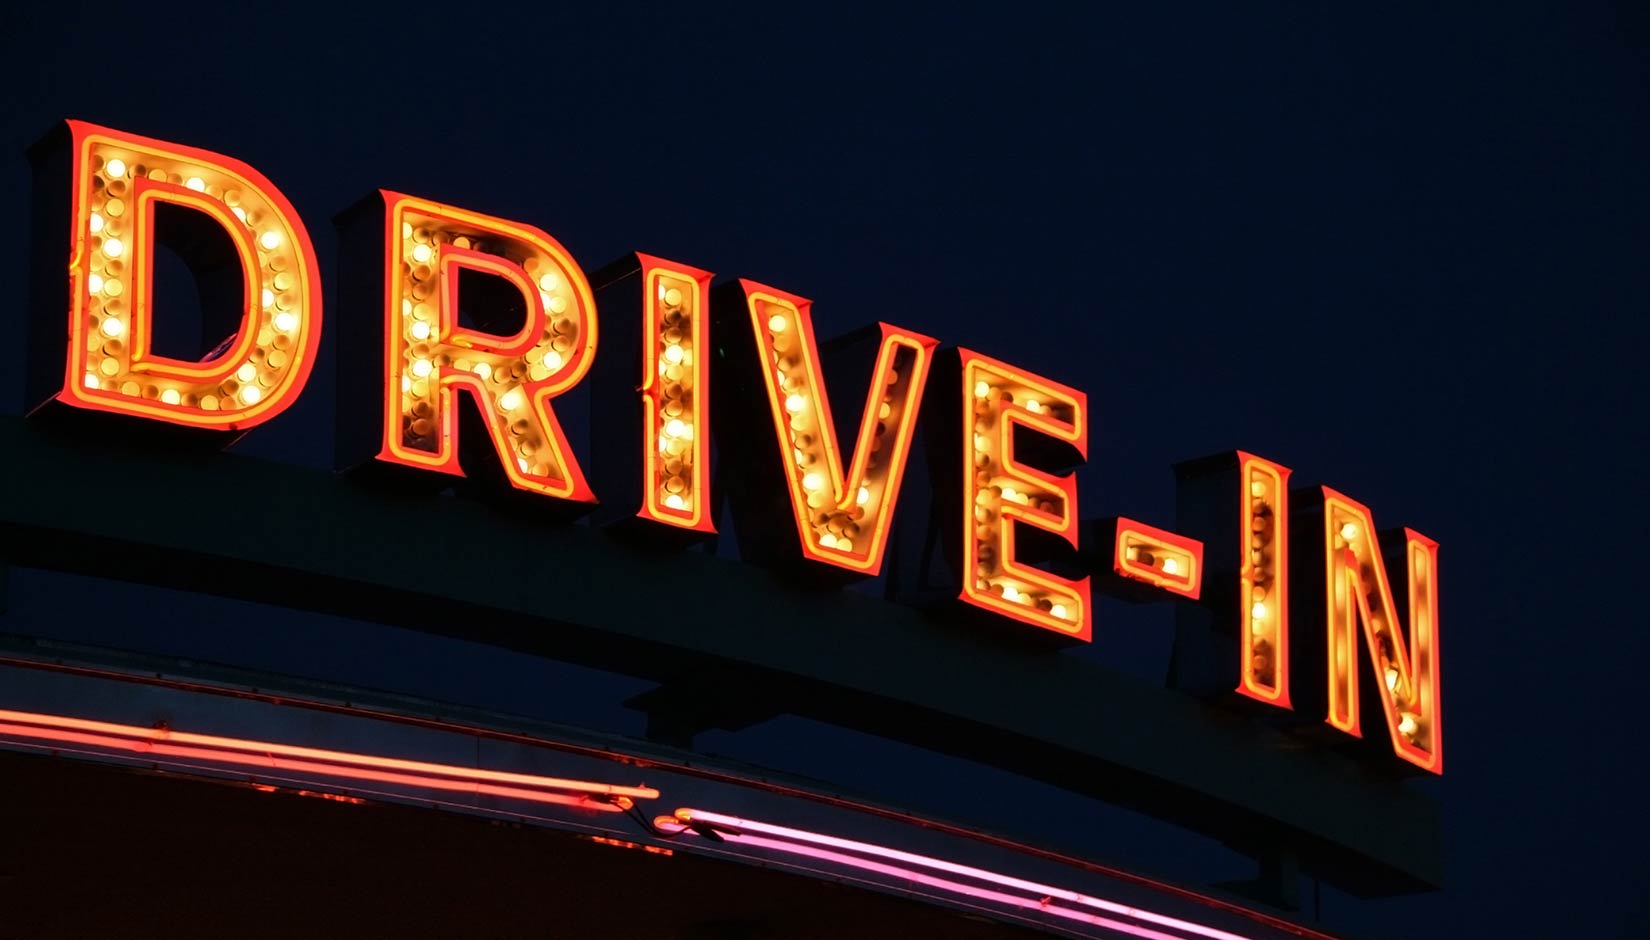 Drive-in Movies